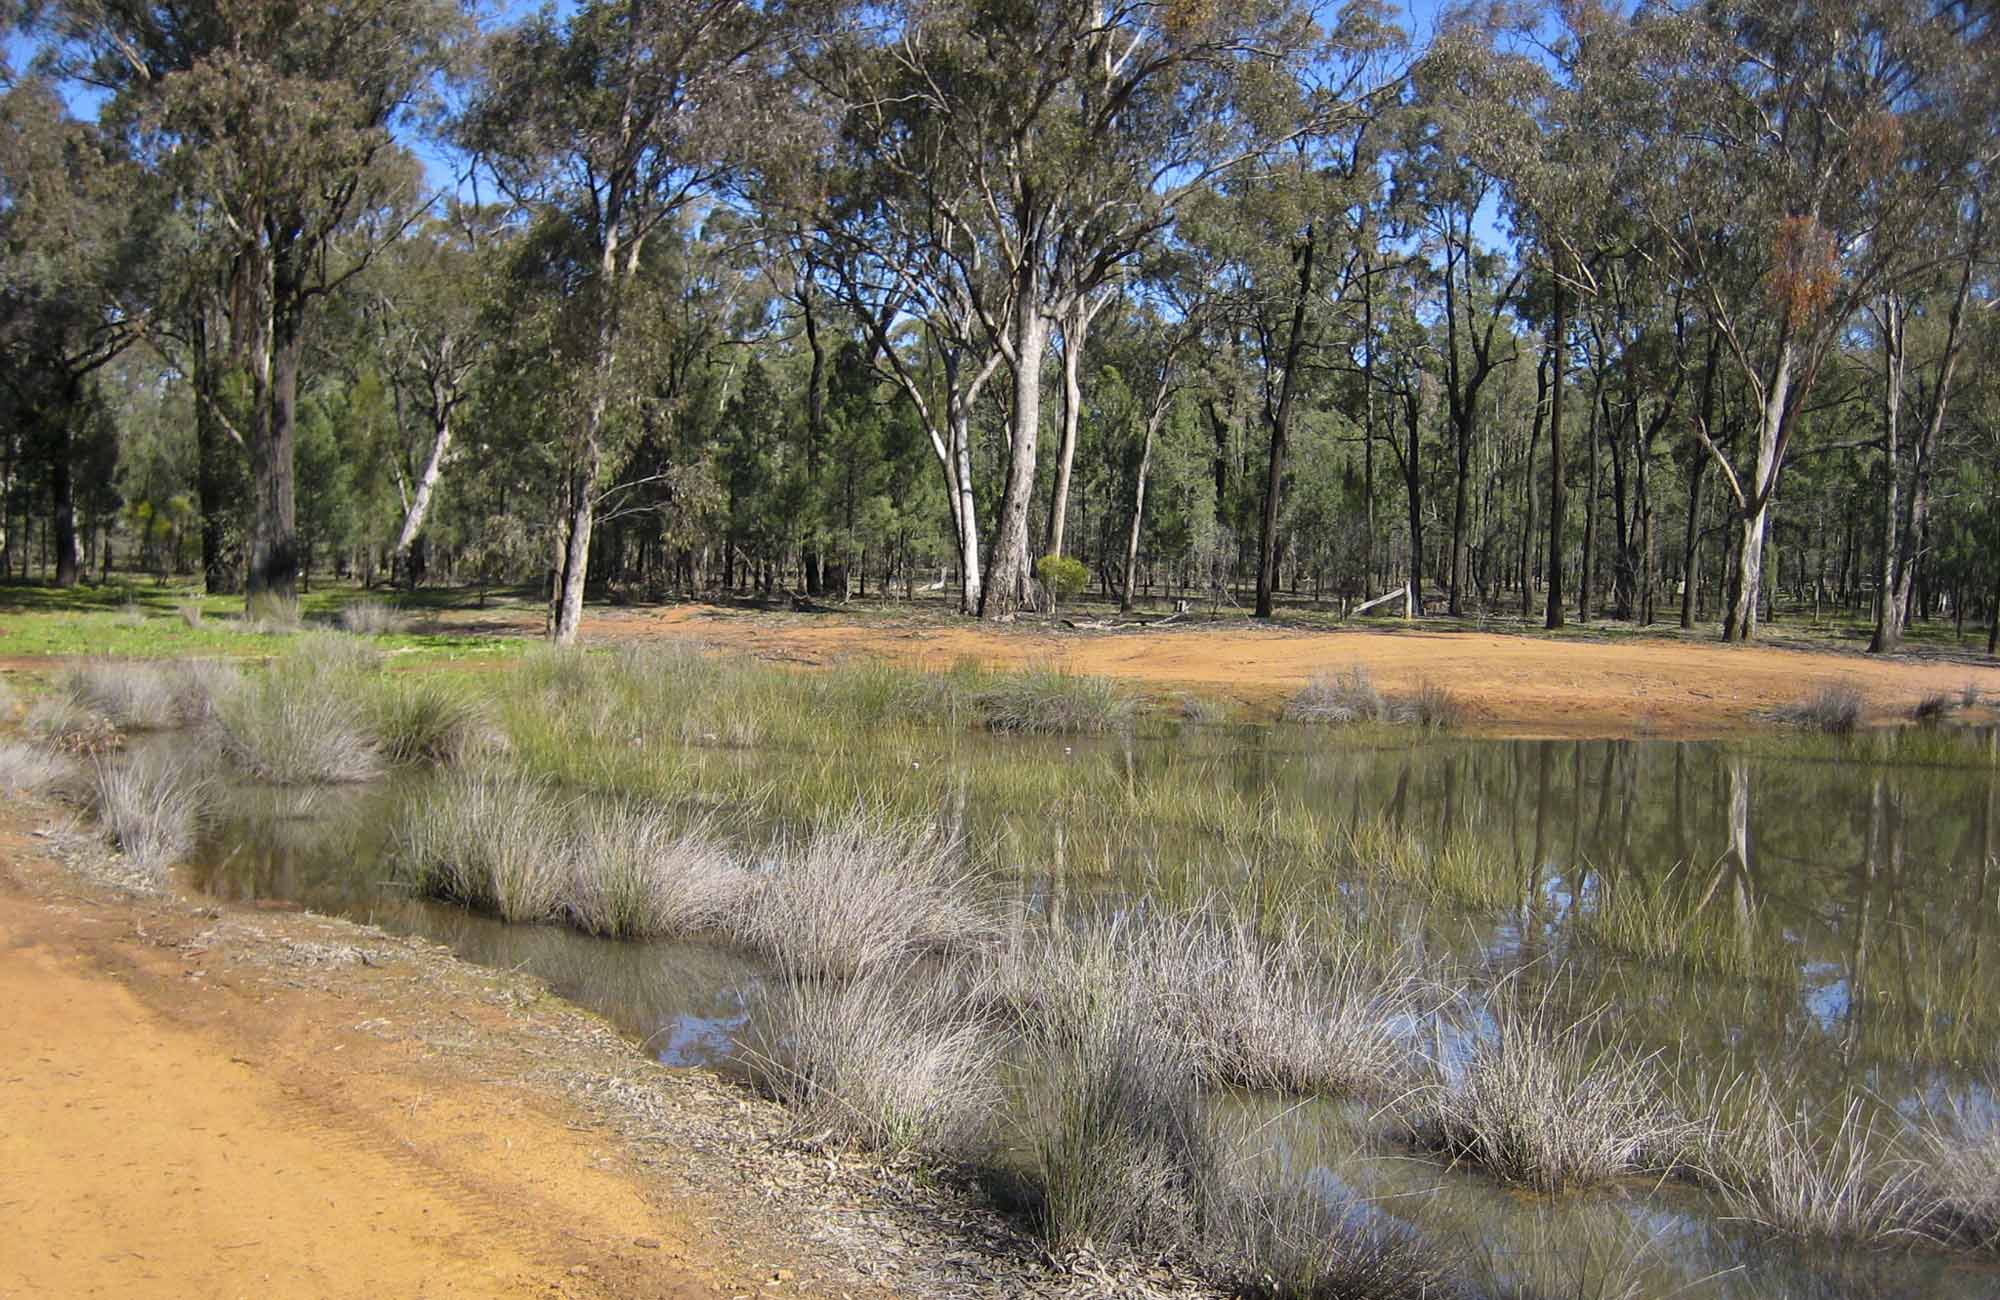 Two Dams picnic area, Ben State Conservation Area. Photo: M Bannerman